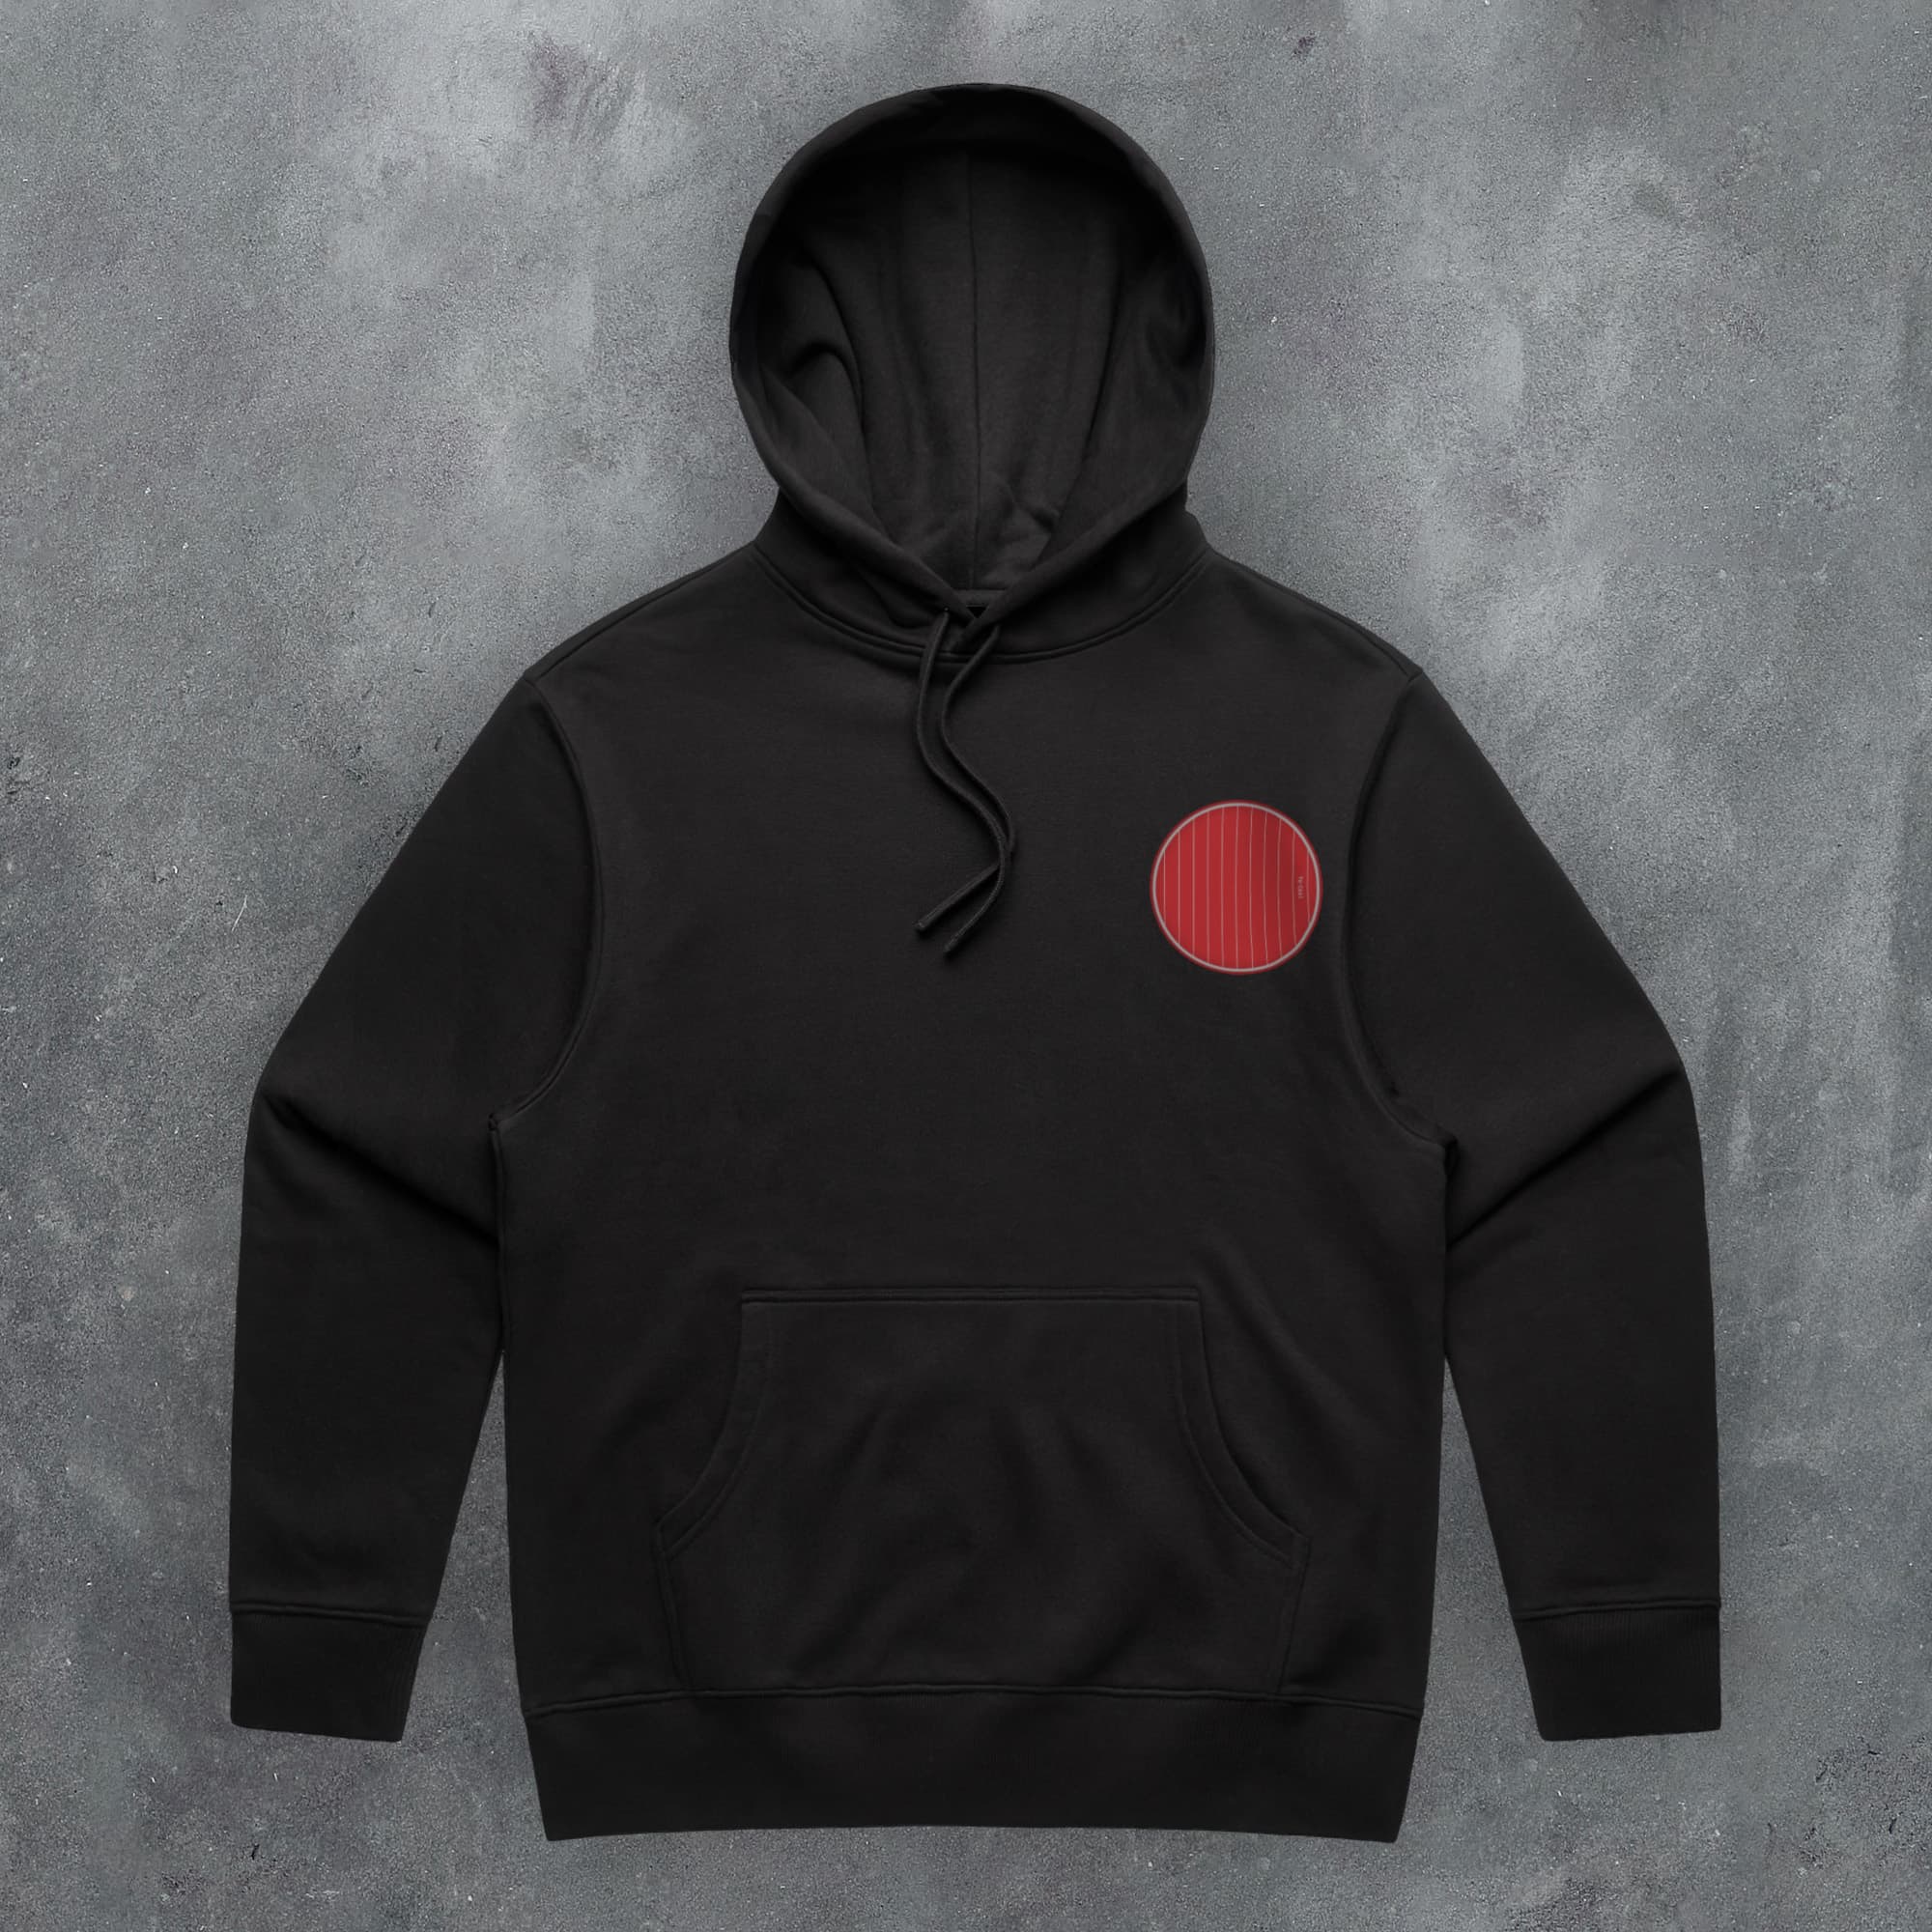 a black hoodie with a red circle on it